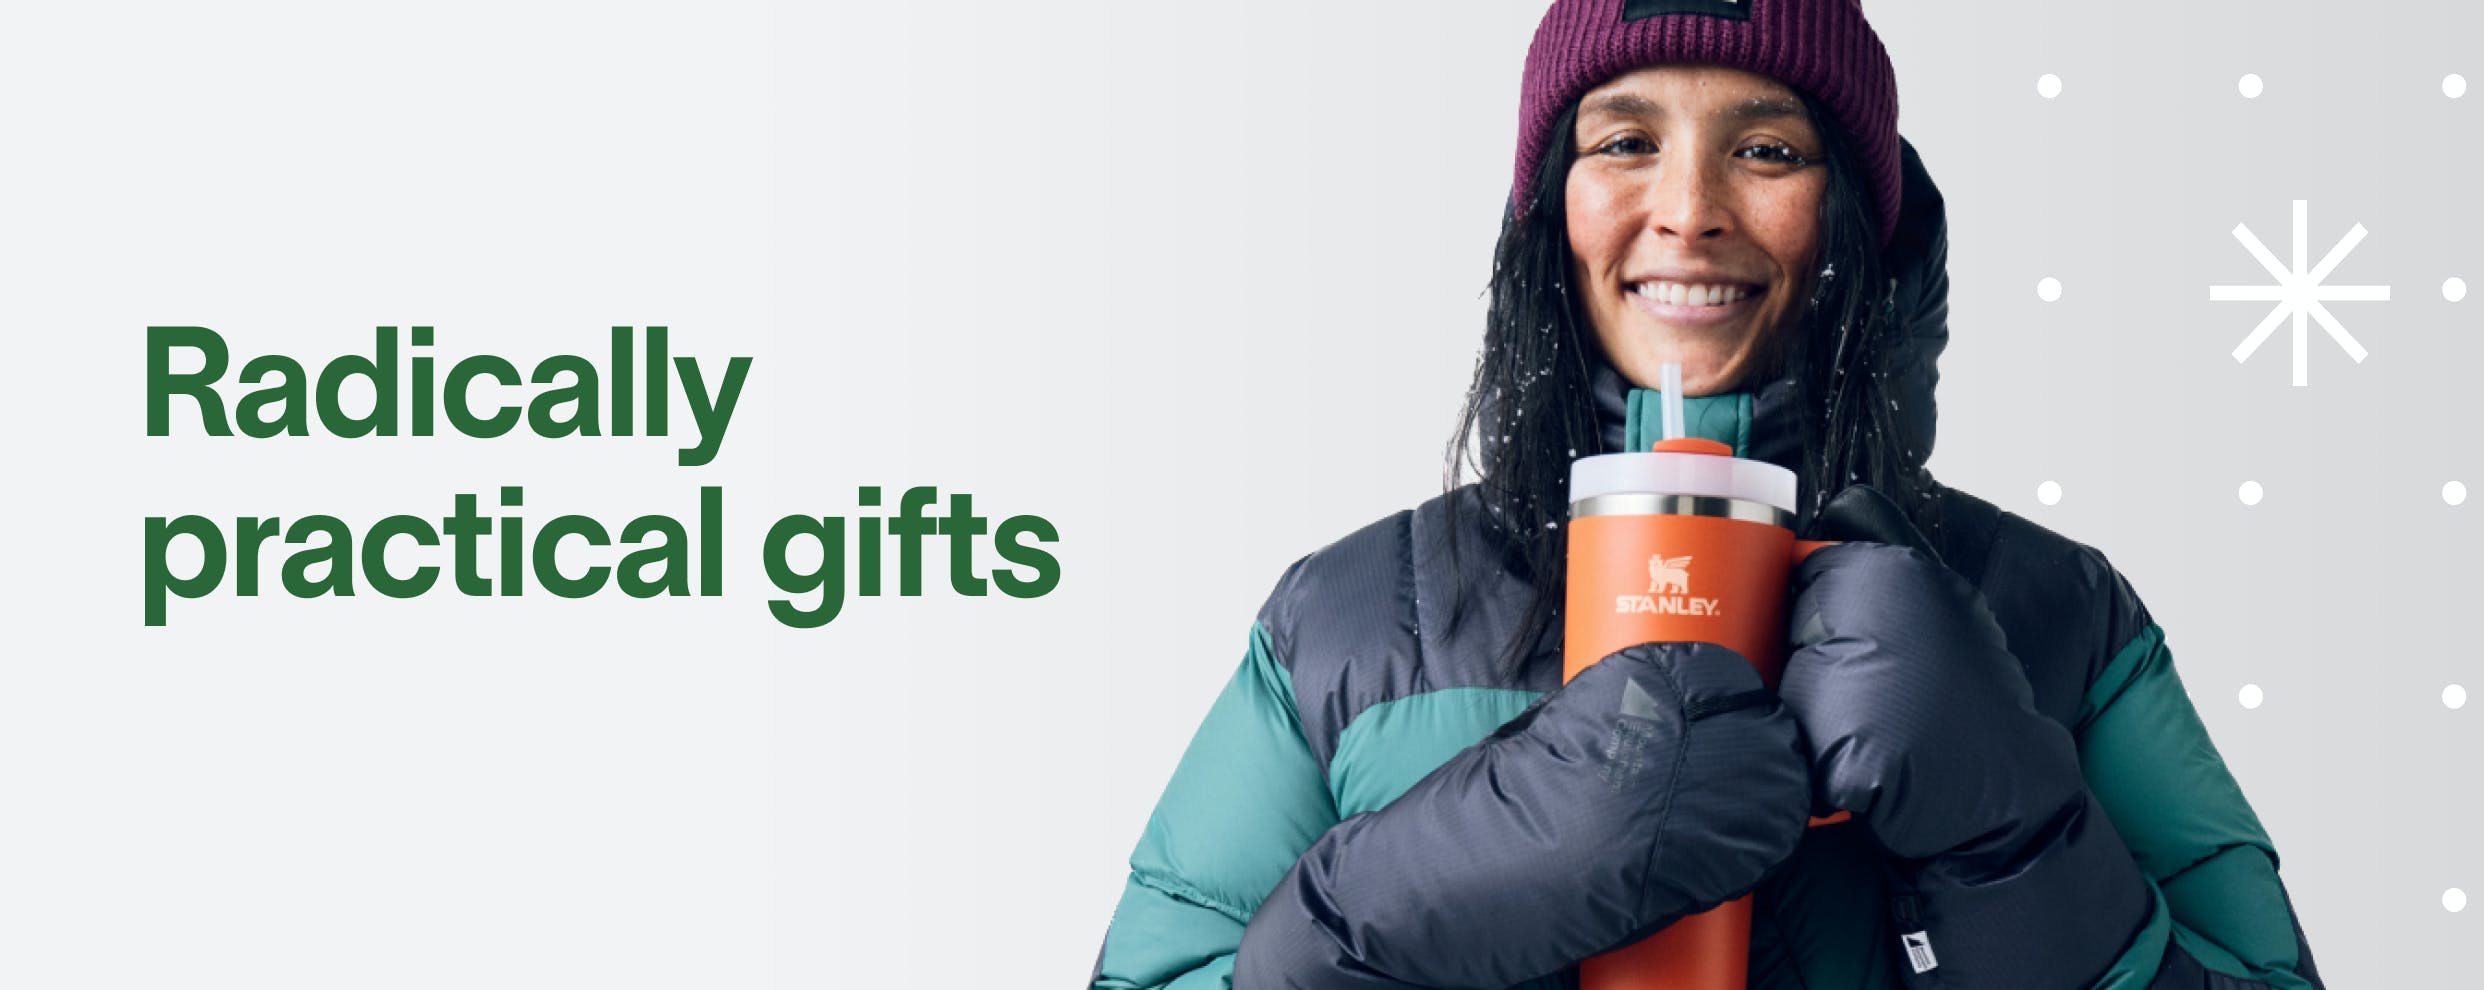 Outdoor Gift Ideas. The early bird gets the best gear. Top gifts for powder seekers, trail ramblers and camp chefs.